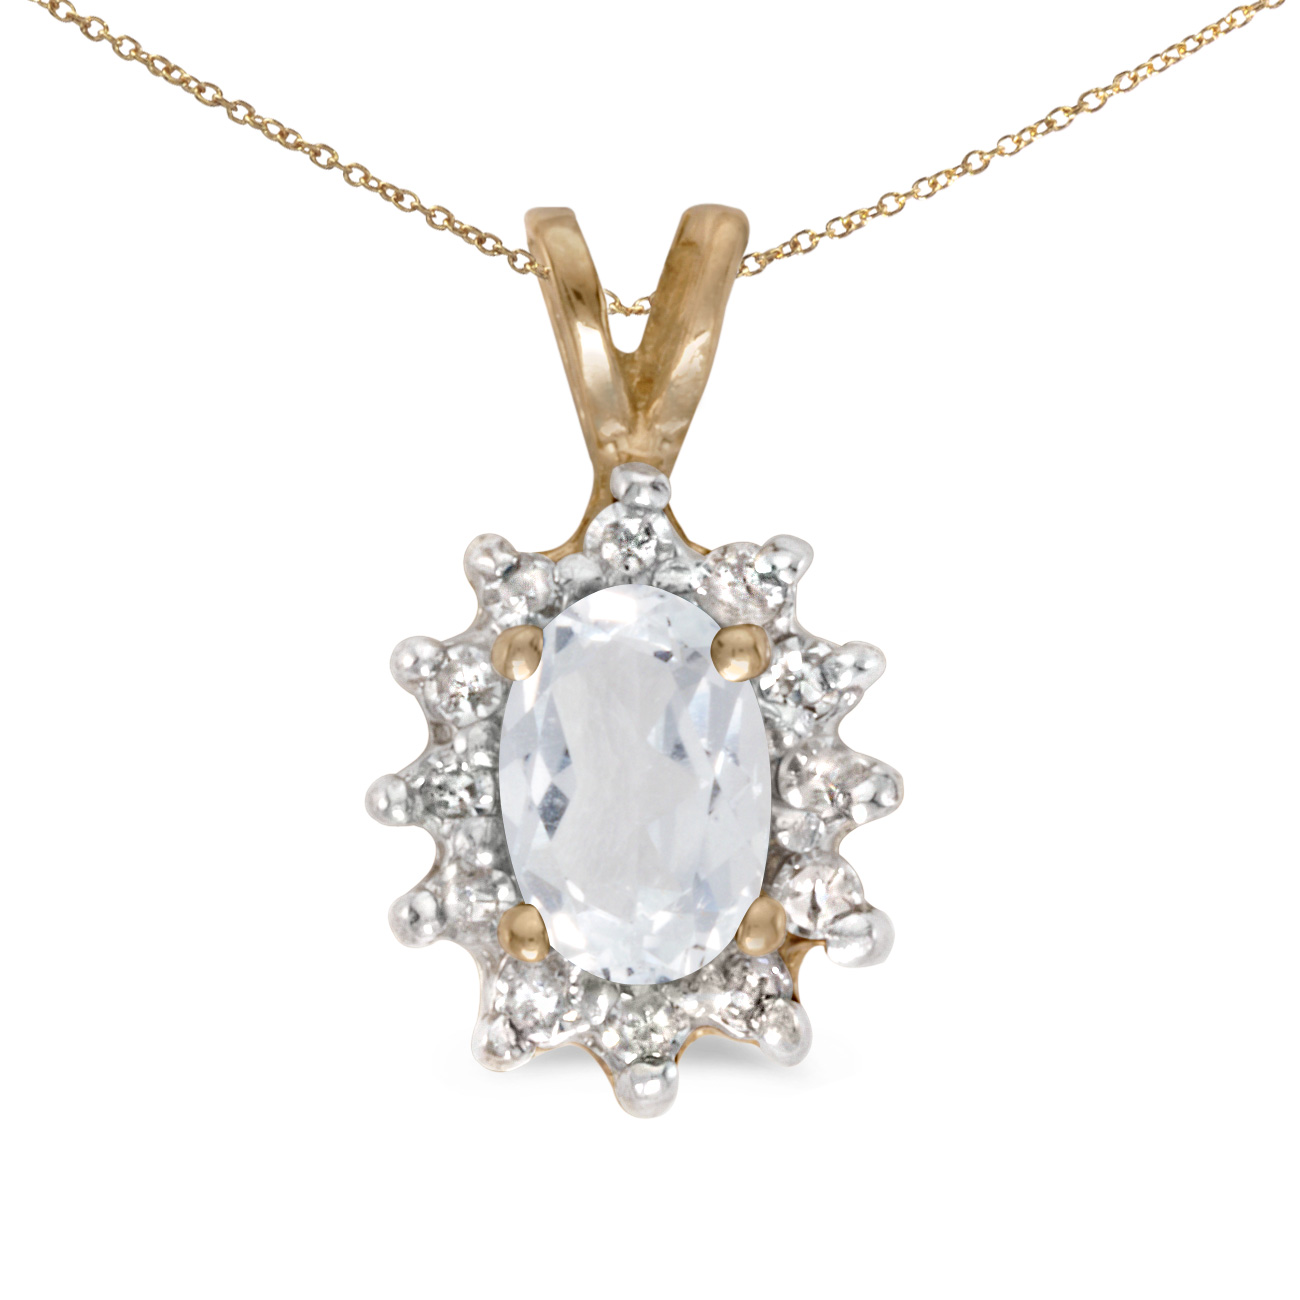 DIRECT-JEWELRY DON'T FORGET THE DASH 14k Yellow Gold Oval White Topaz And Diamond Pendant with 18" Chain